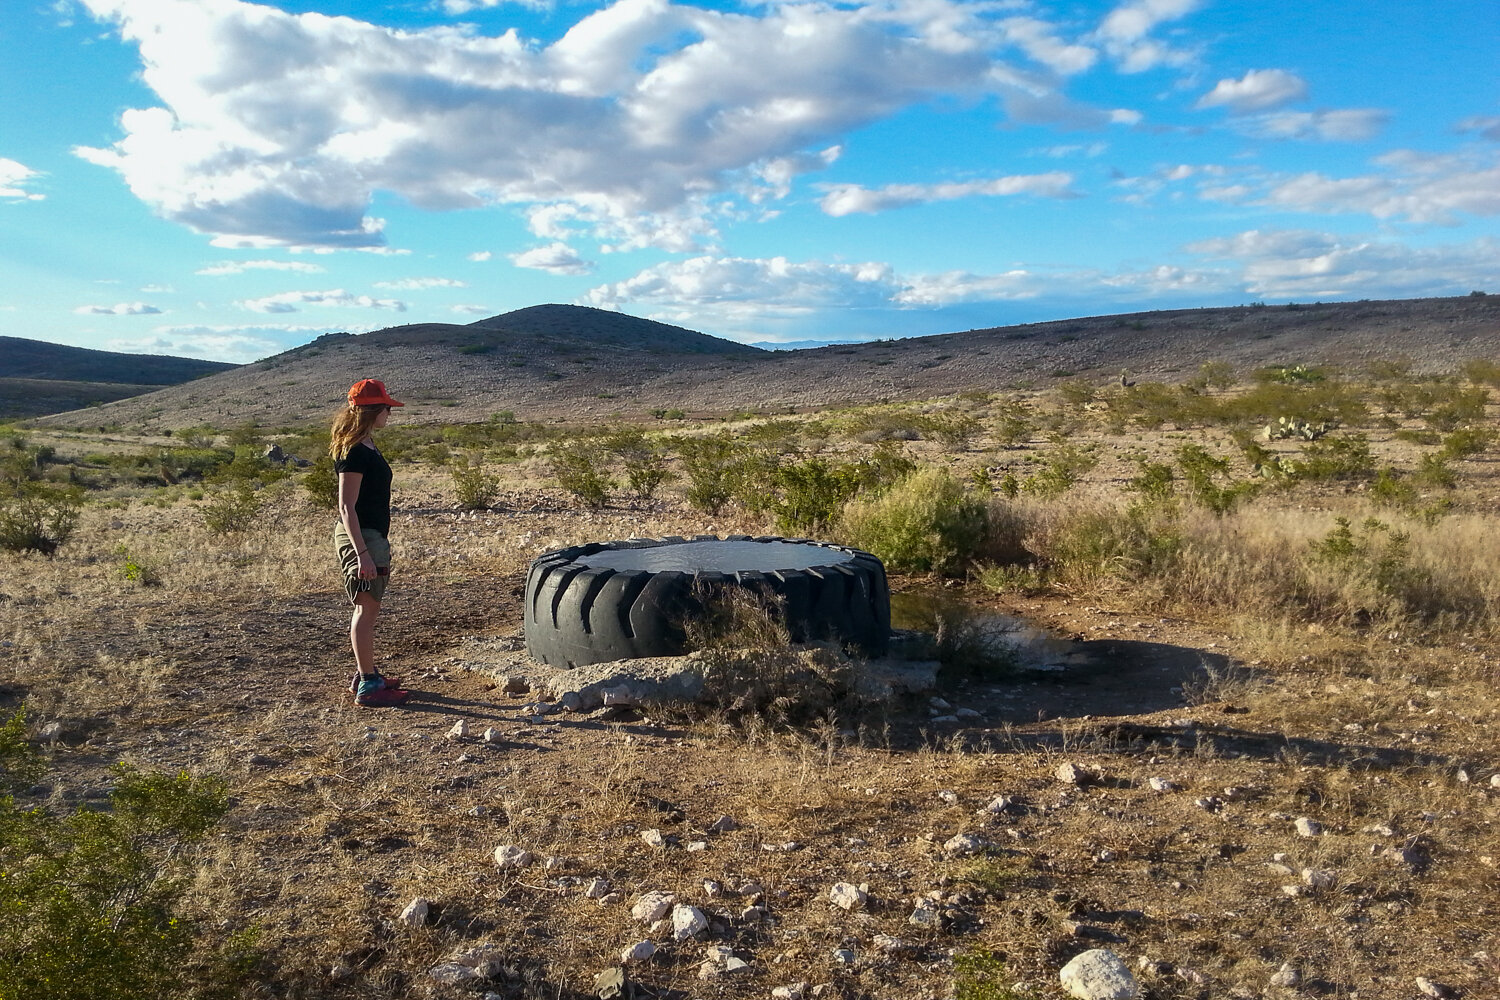 A tire used as a watering hole for cattle in New Mexico